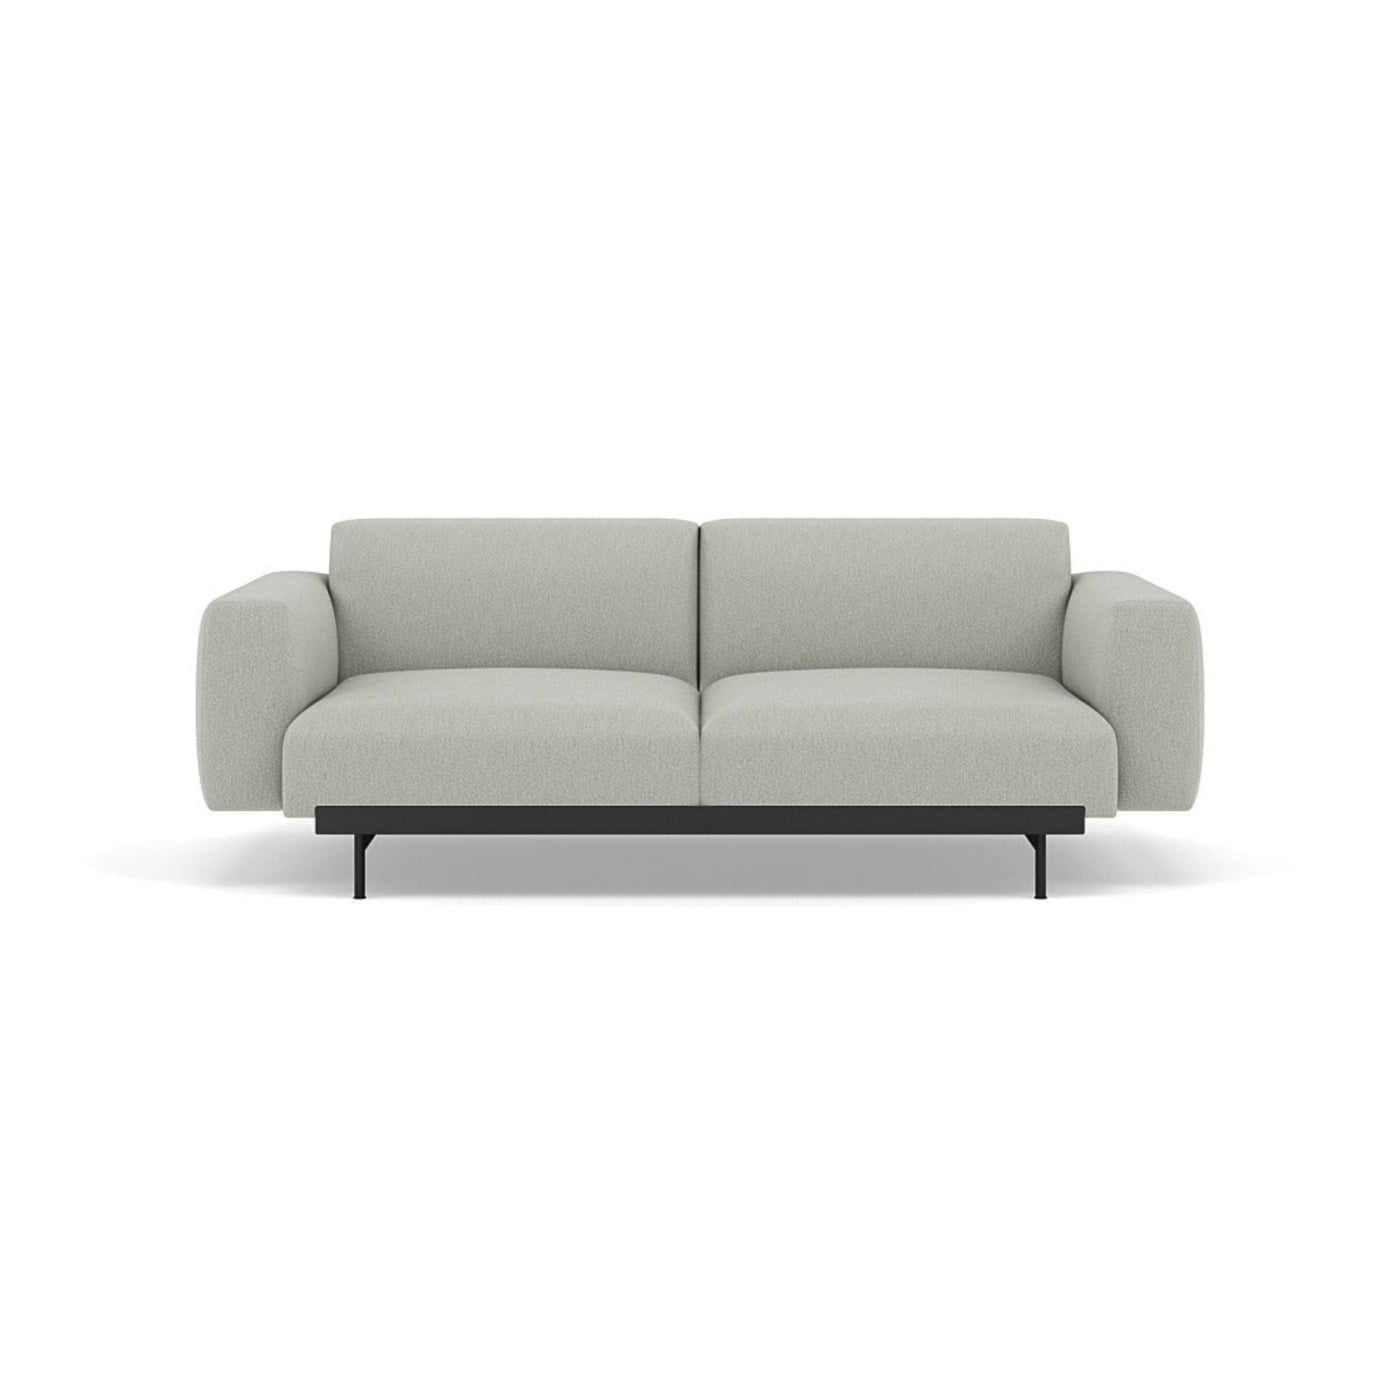 Muuto In Situ Modular 2 Seater Sofa, configuration 1 in clay 12 fabric. Made to order from someday designs #colour_clay-12